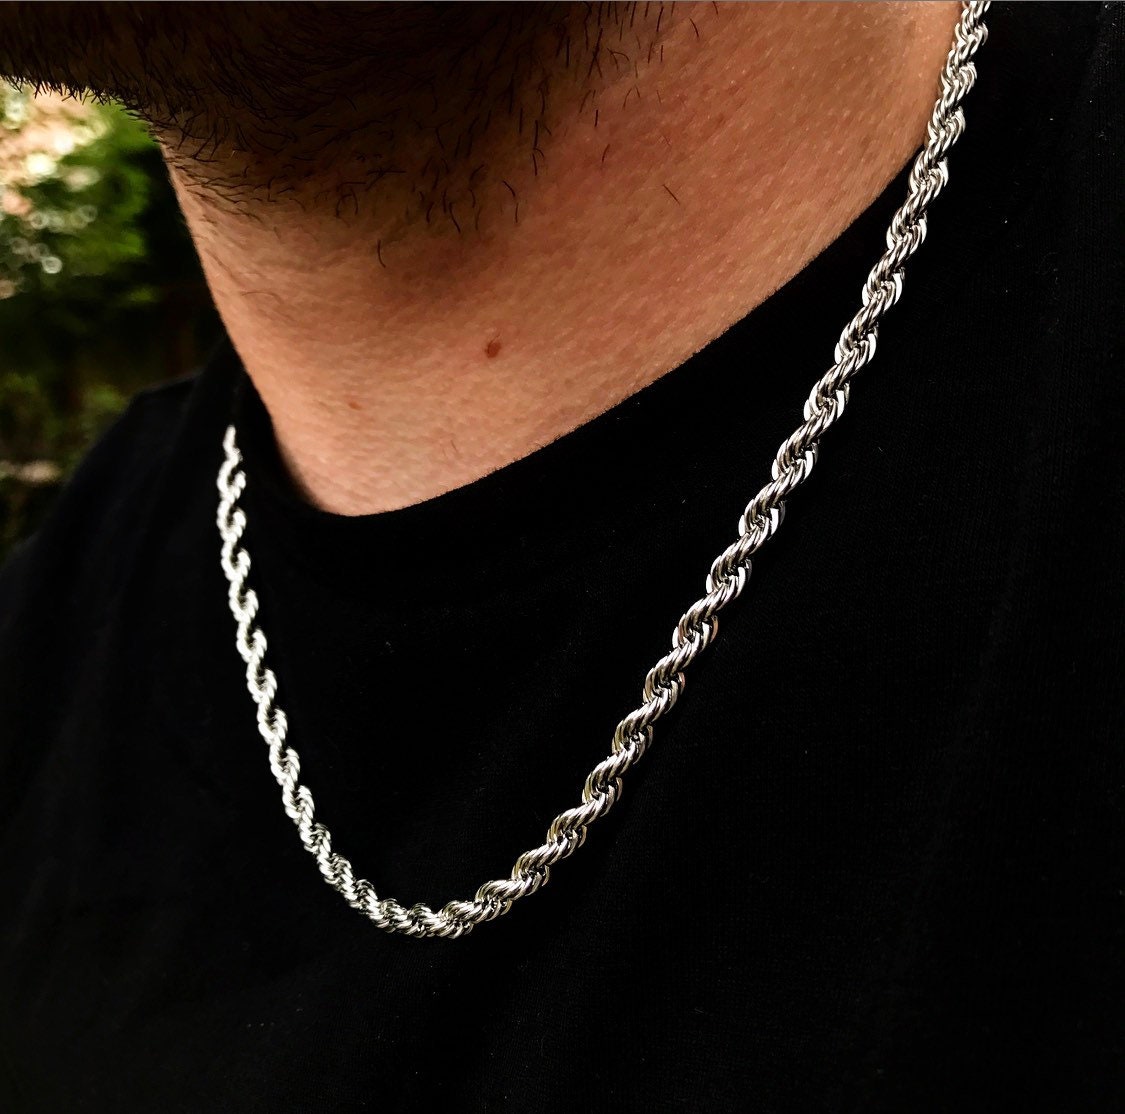 Silver Rope Chain, 5mm Thick Link Chain Necklace for Men, Mens / Boys Chain, Chunky Silver Rope Chain Mens Jewellery - by Twistedpendant